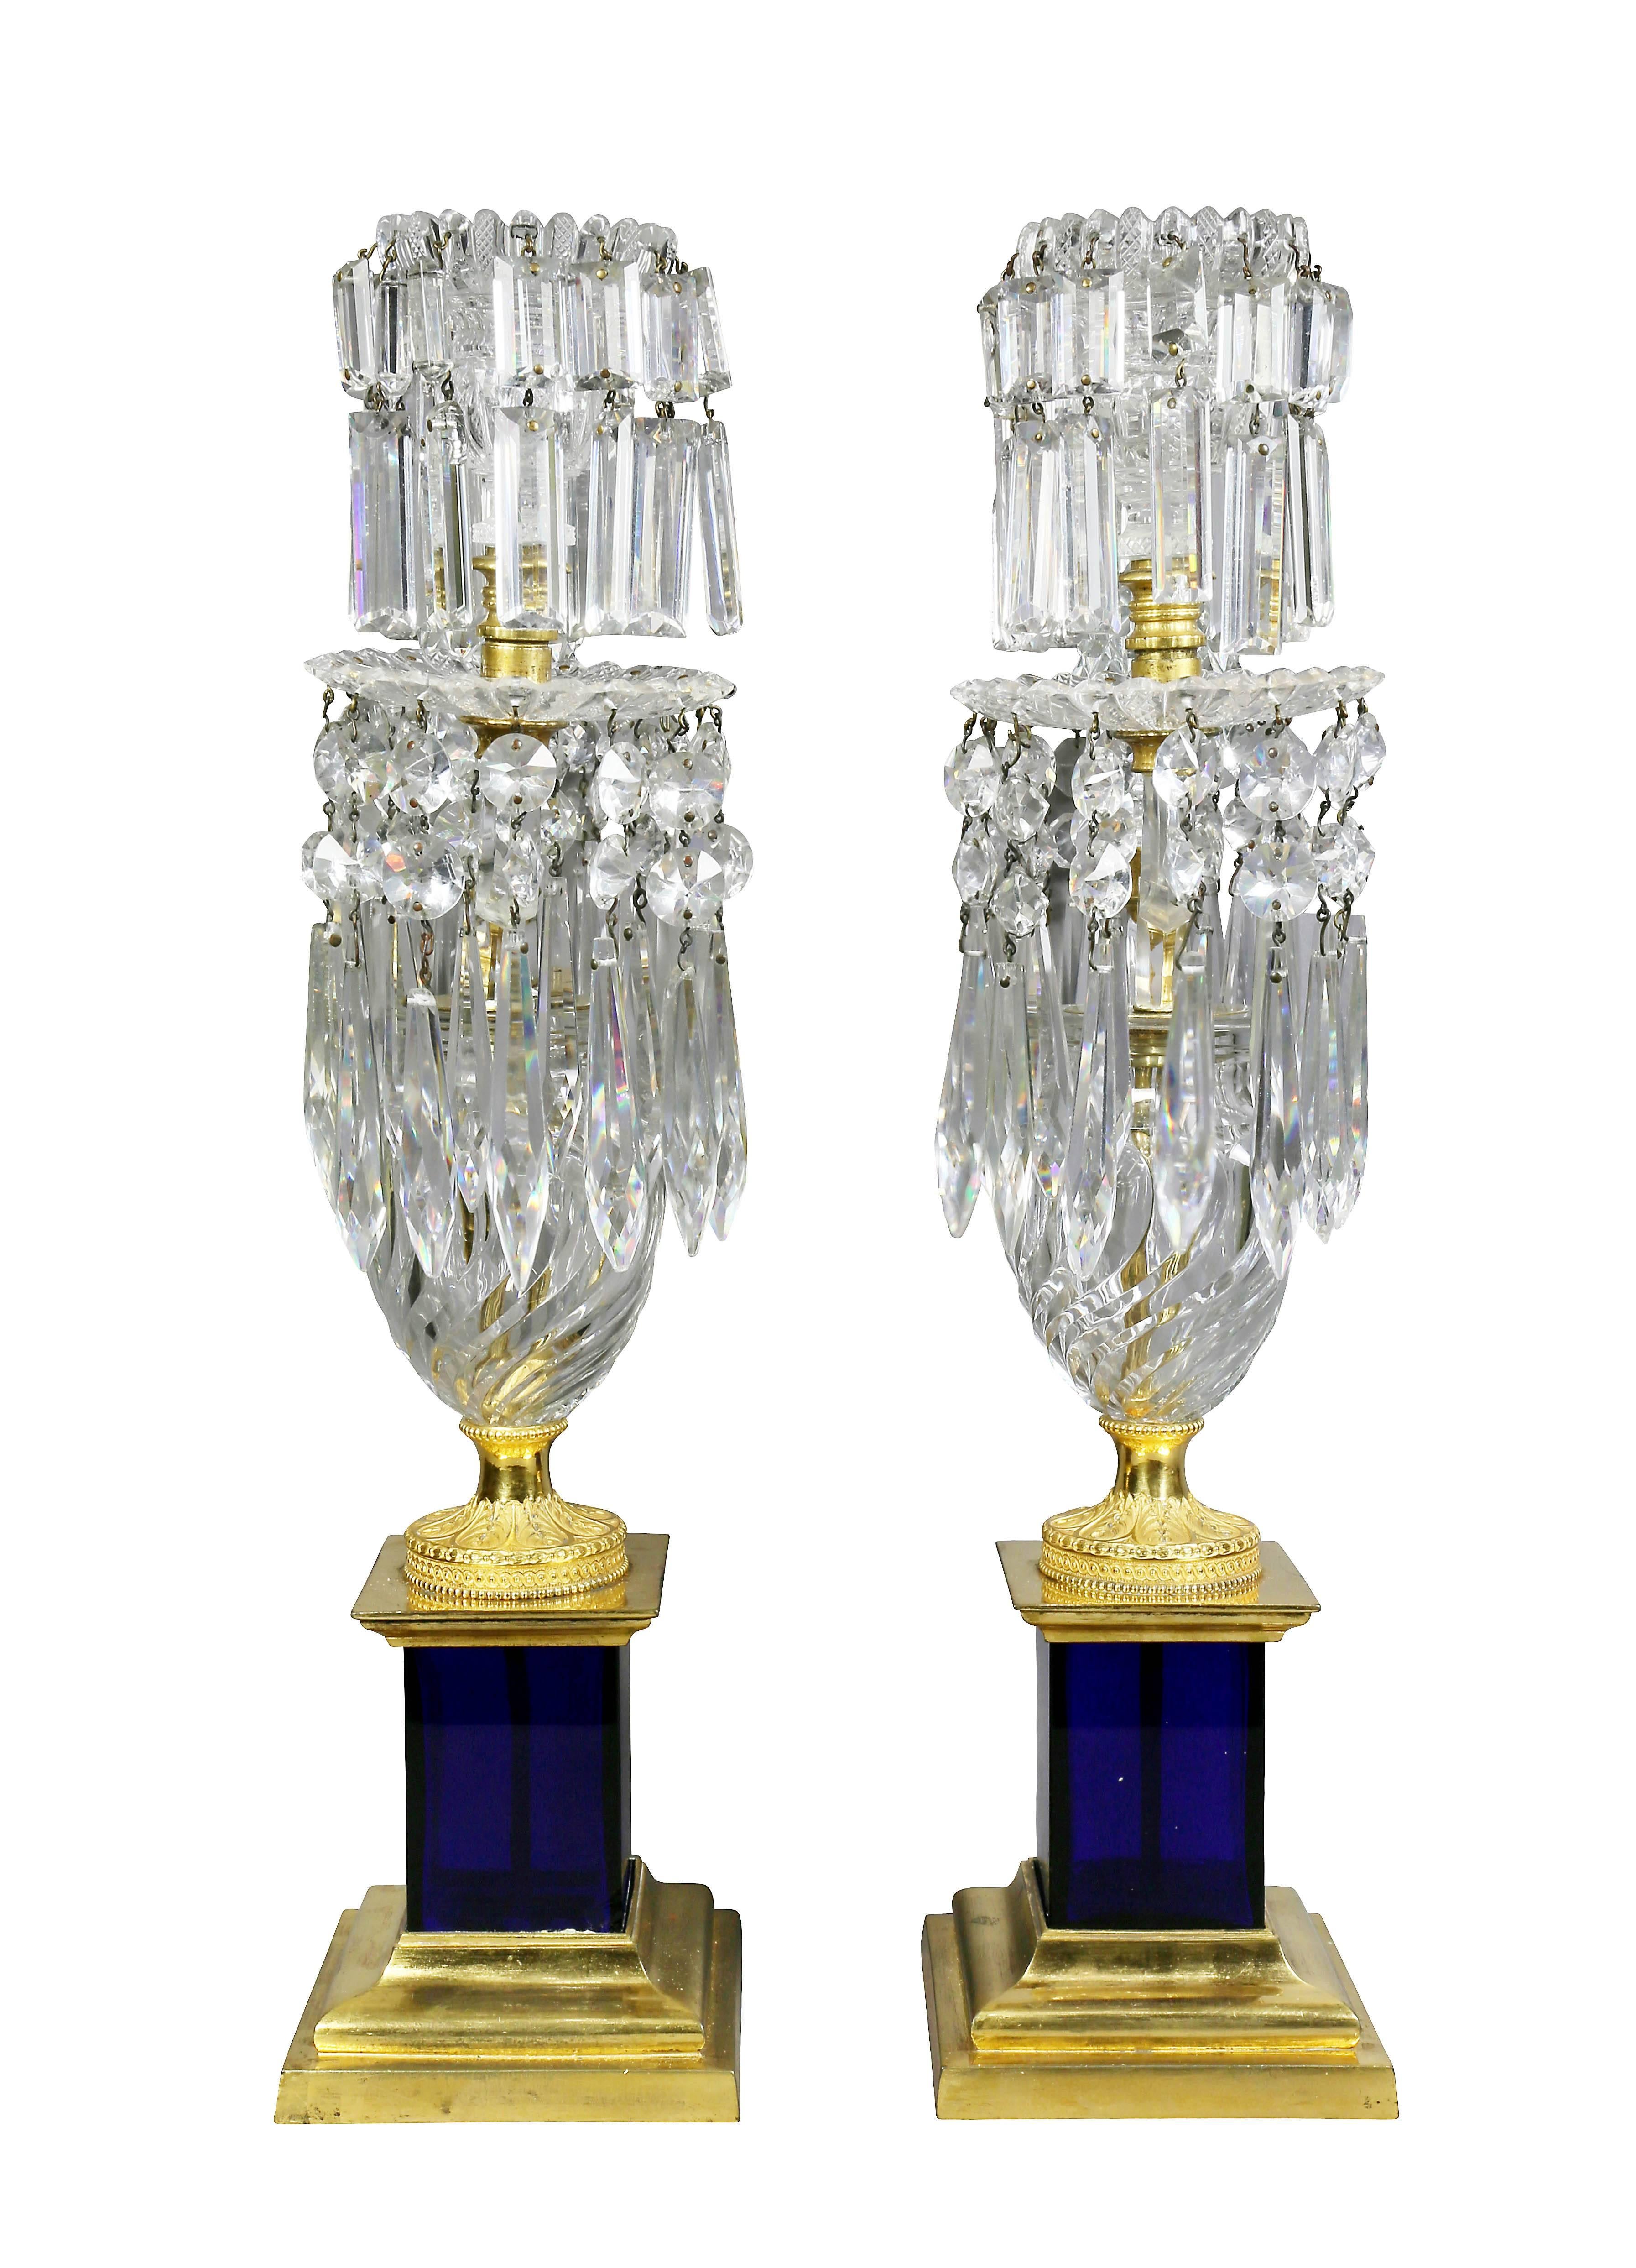 Pair of Regency Cut-Glass & Gilt Bronze Candelabra, Attributed to Parker & Perry For Sale 4